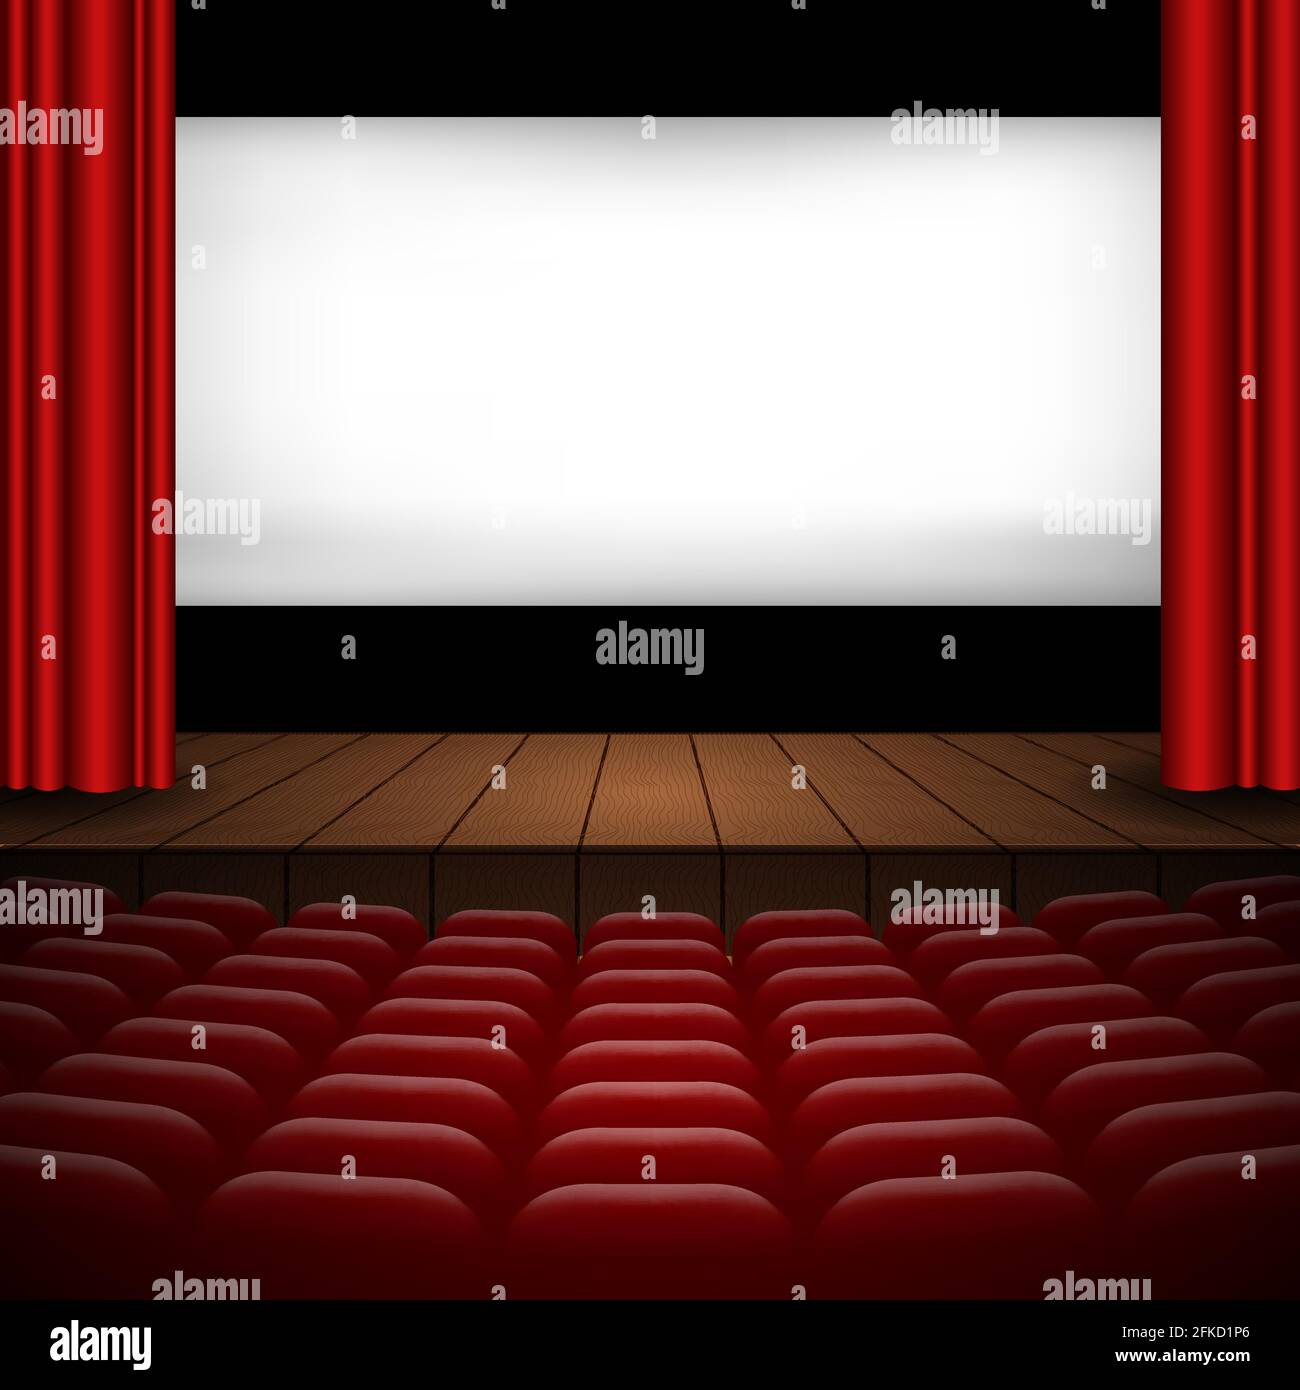 illustration of the interior of a cinema movie theatre with red ...